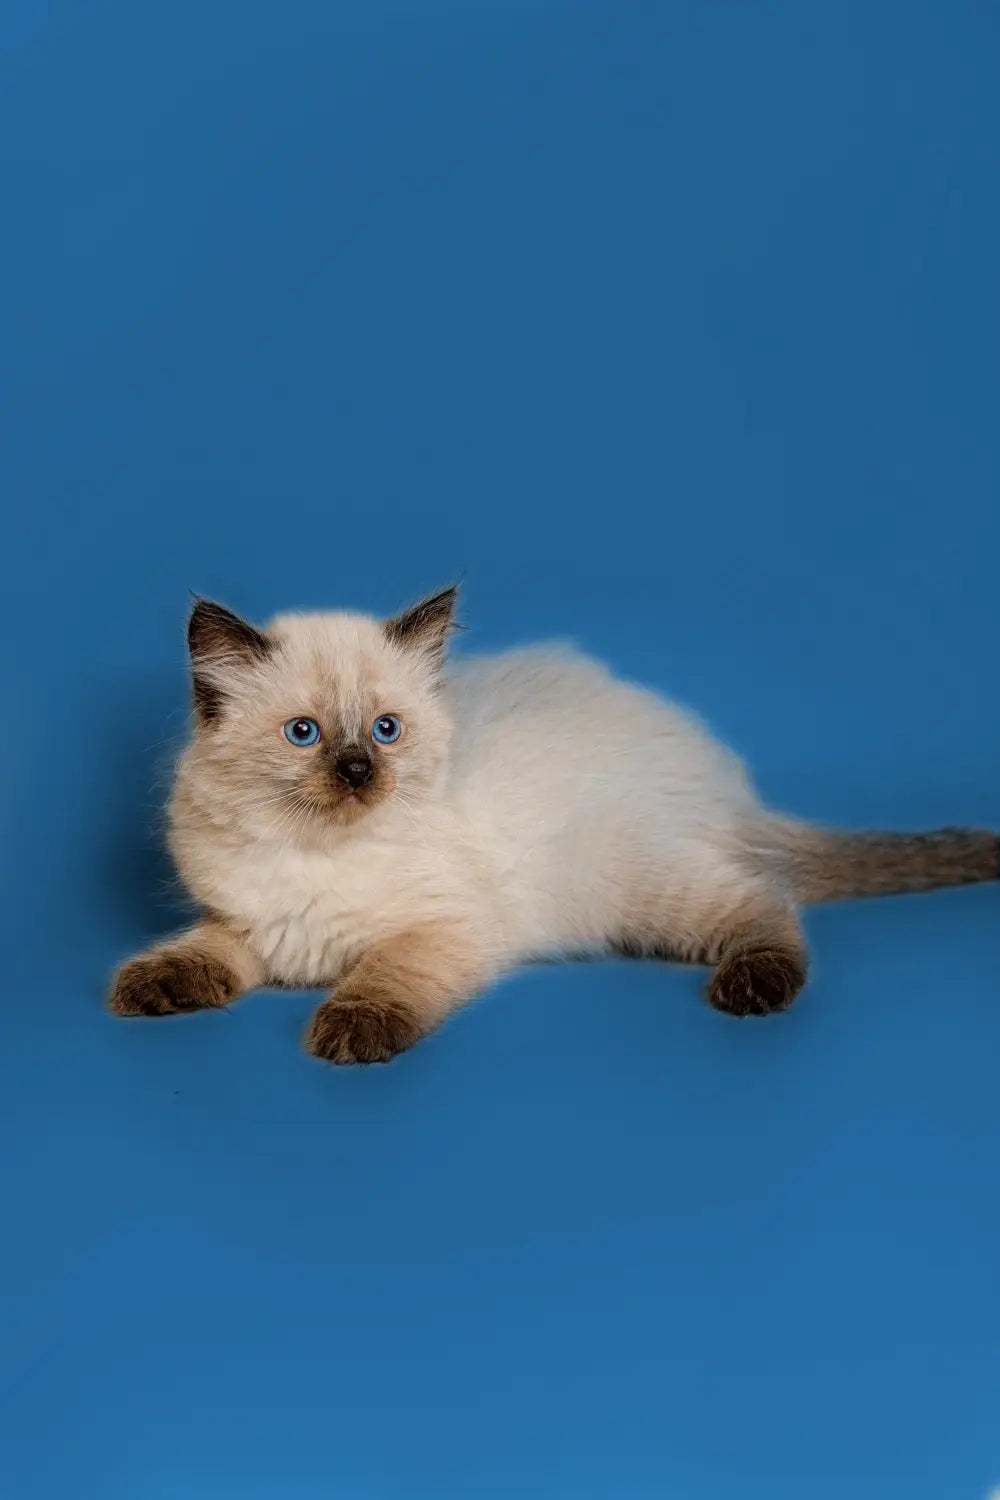 Grooming Tips for Caring for a Ragdoll Cat